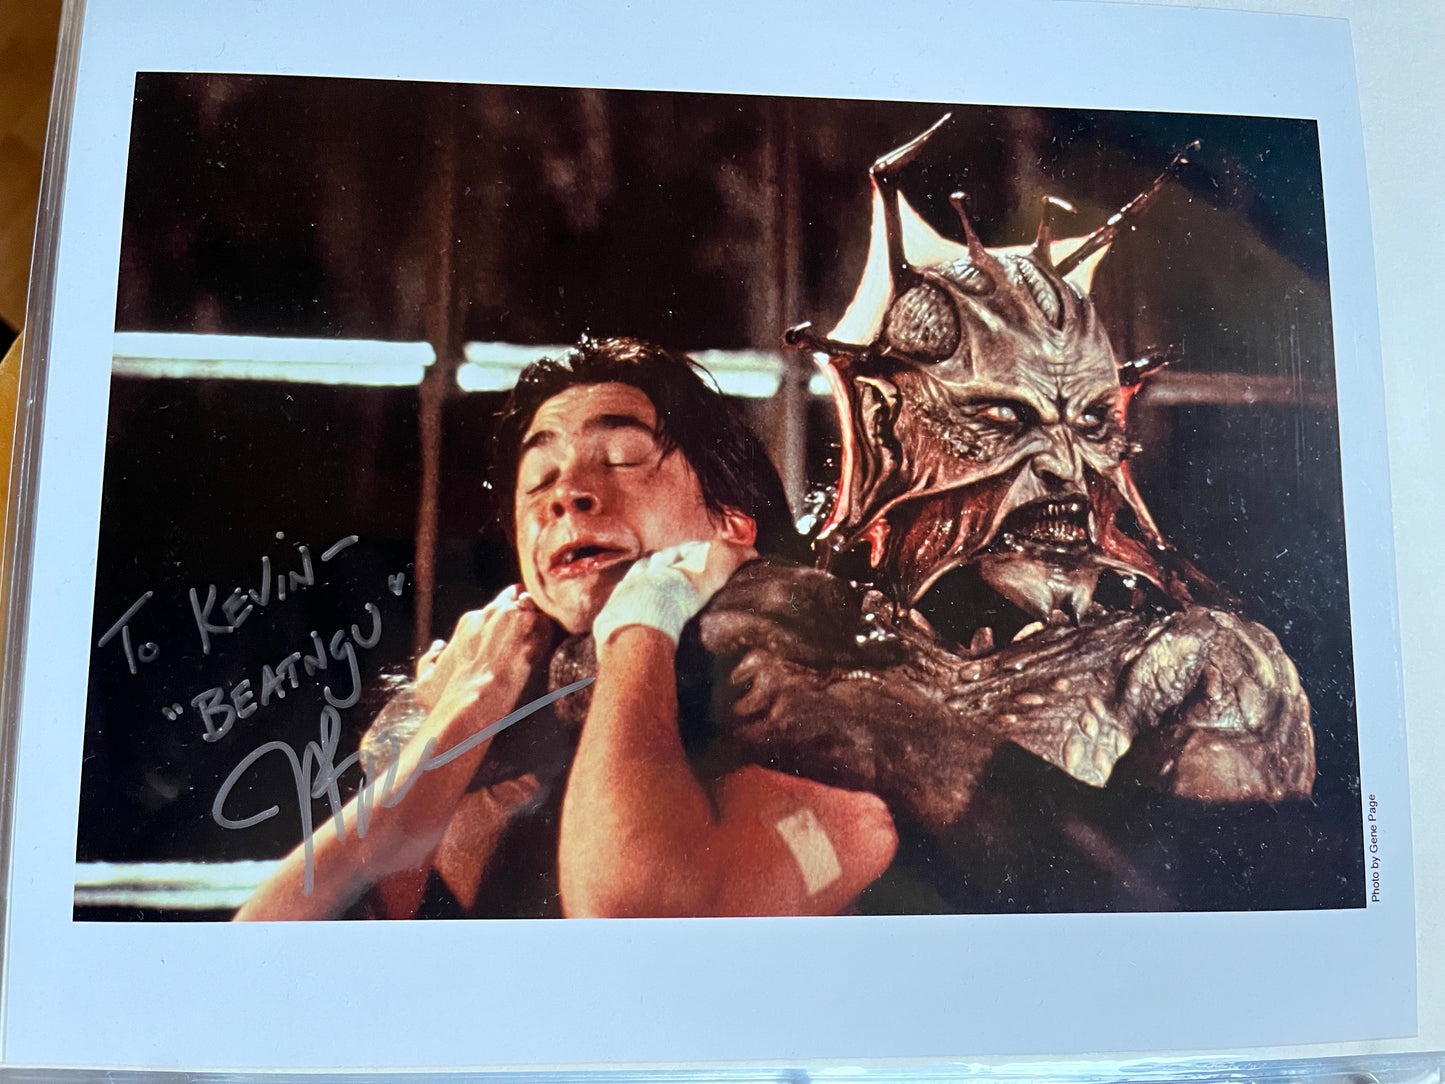 JONATHAN BRECK, Jeepers Creepers, autograph